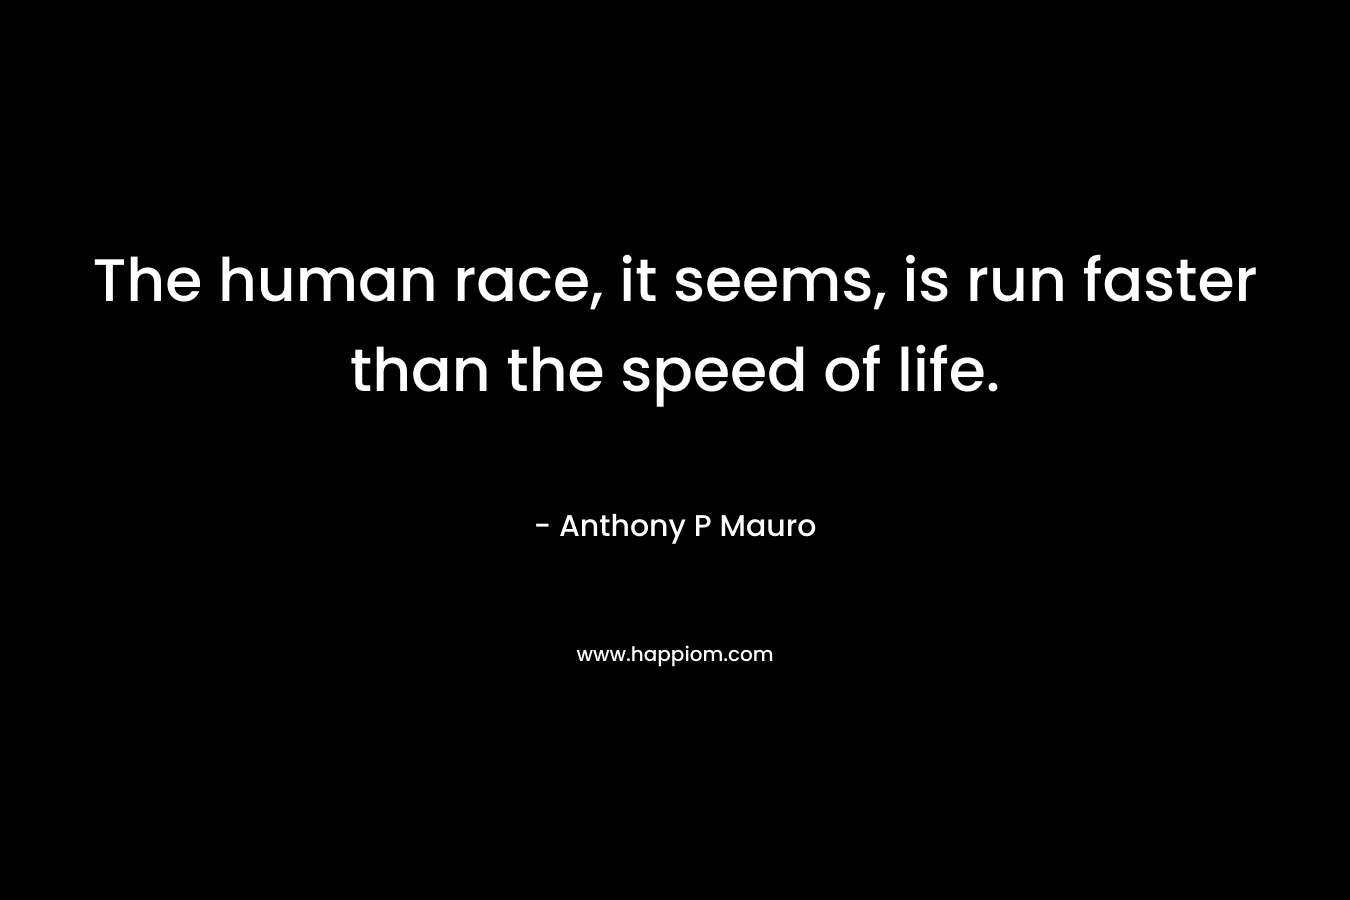 The human race, it seems, is run faster than the speed of life.